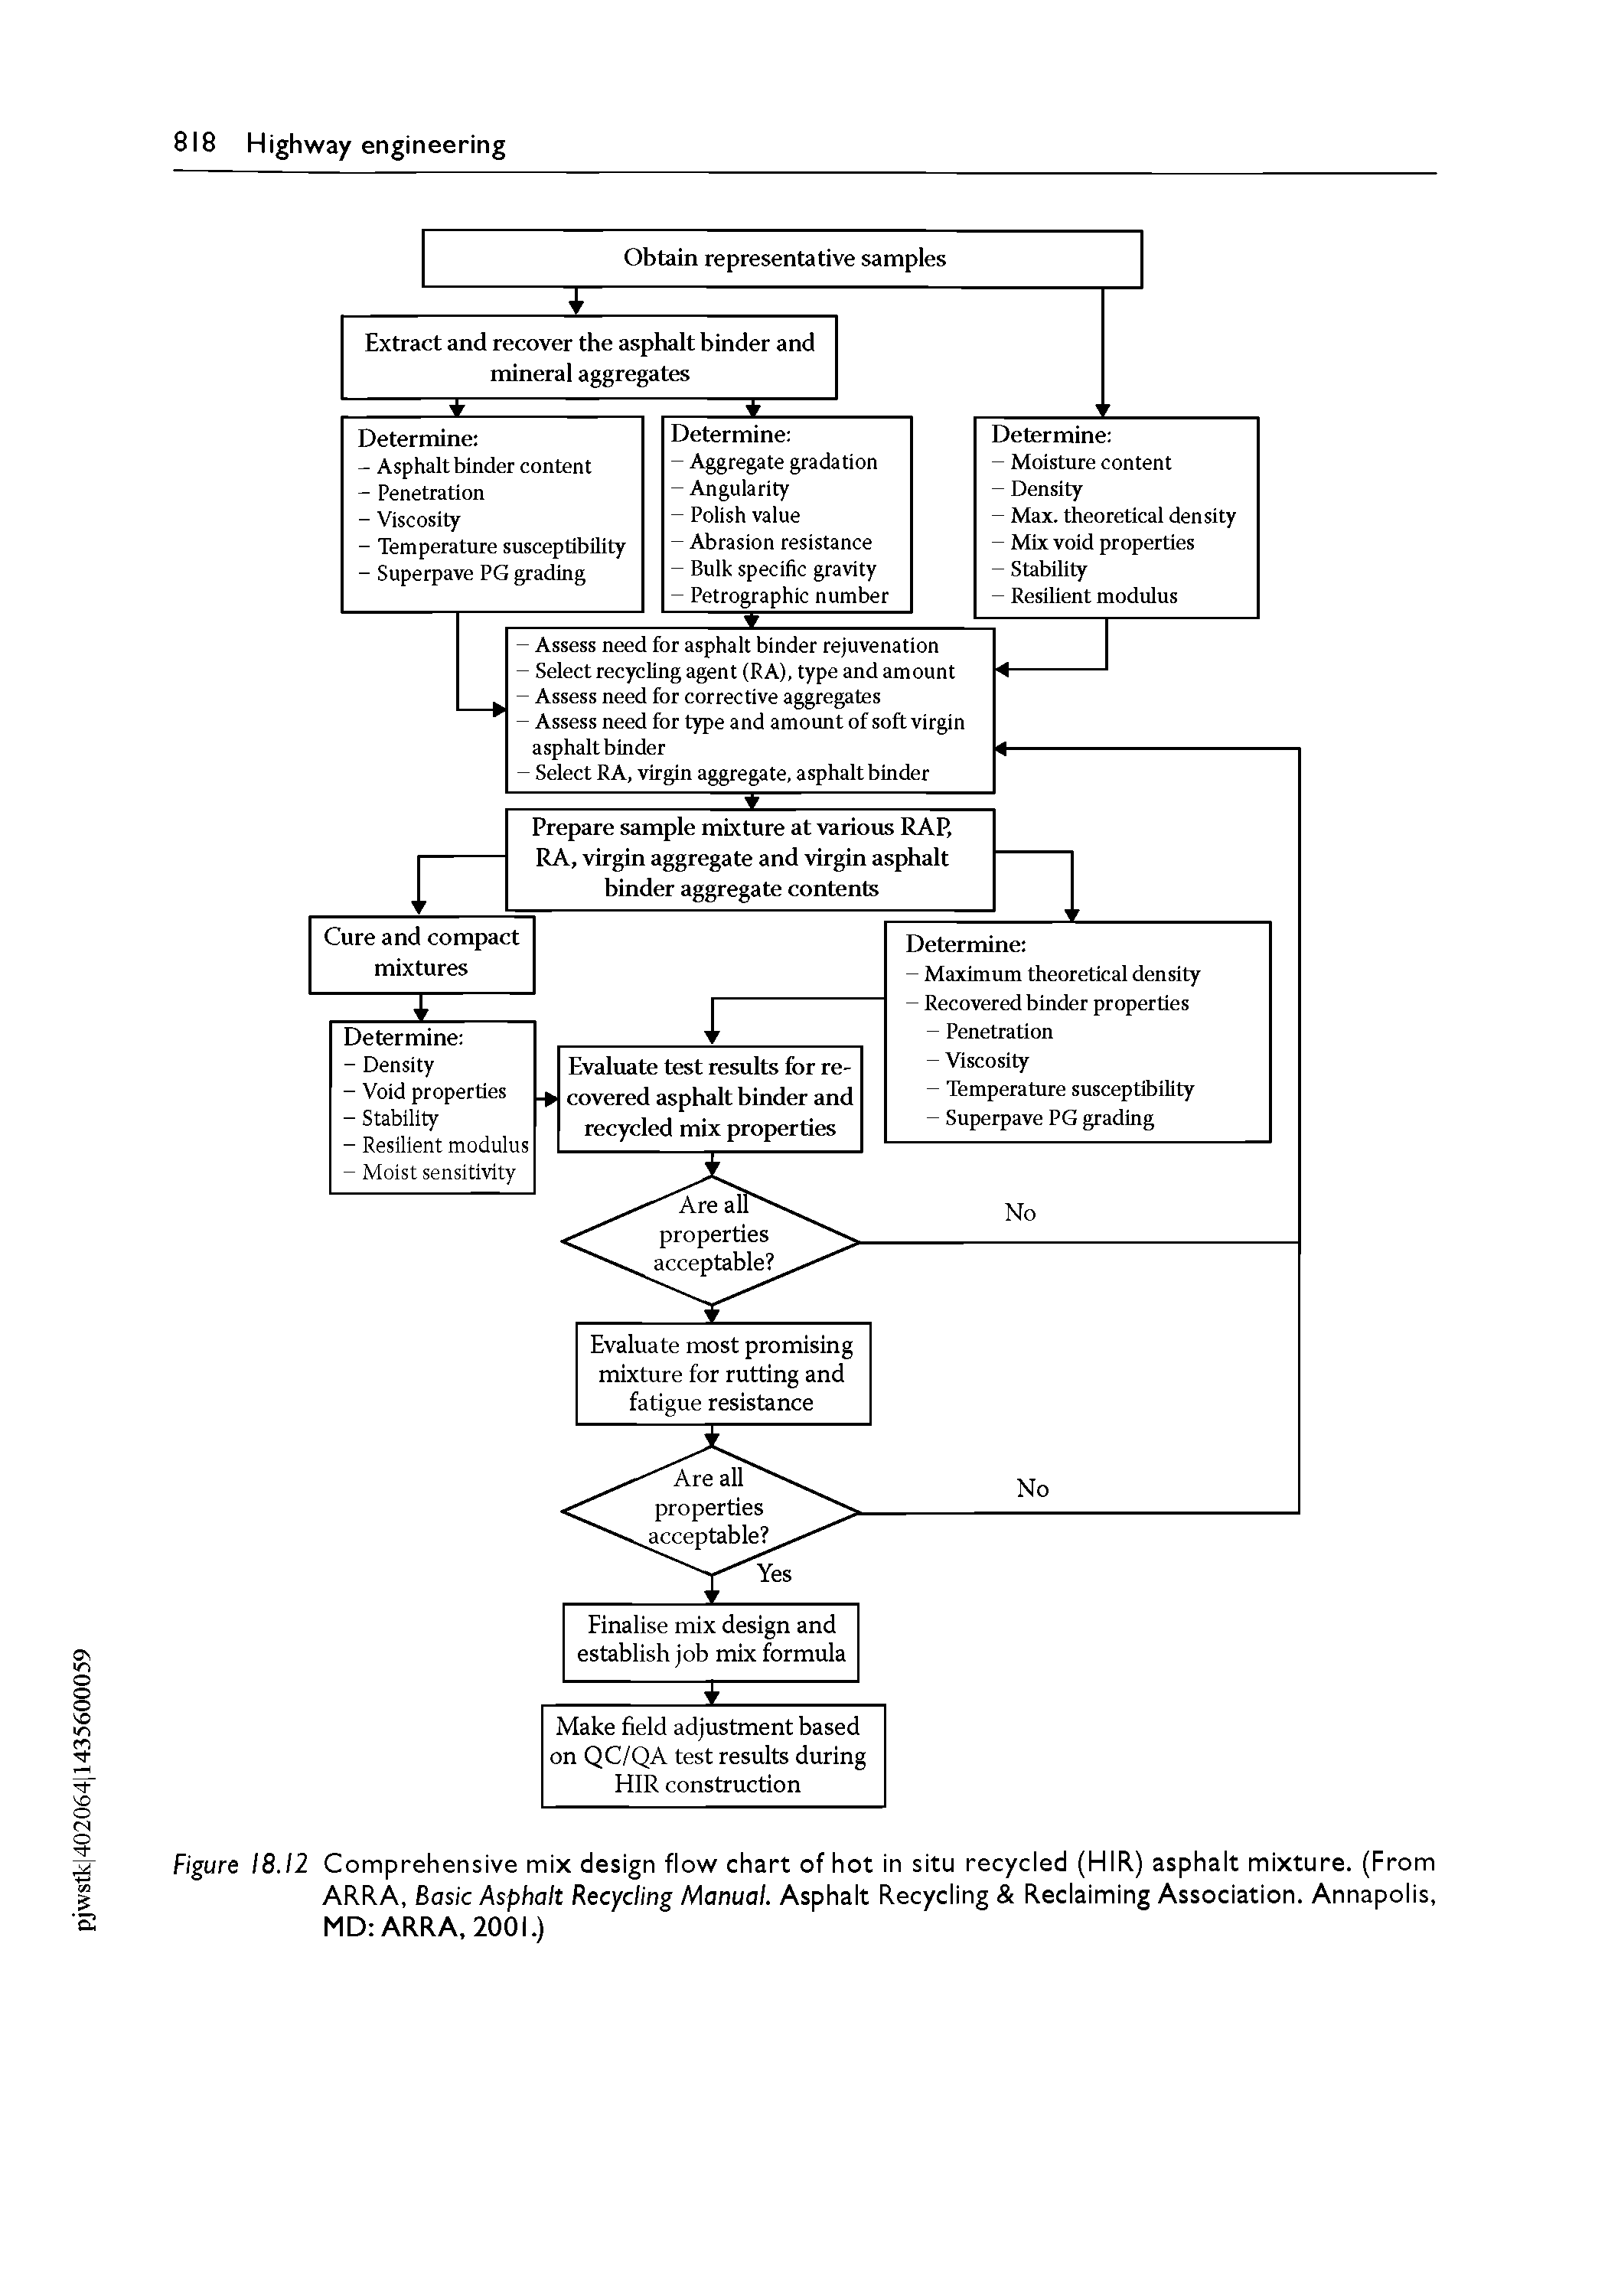 Figure 18.12 Comprehensive mix design flow chart of hot in situ recycled (HIR) asphalt mixture. (From ARRA, Basic Asphalt Recycling Manual. Asphalt Recycling Reclaiming Association. Annapolis, MD ARRA. 2001.)...